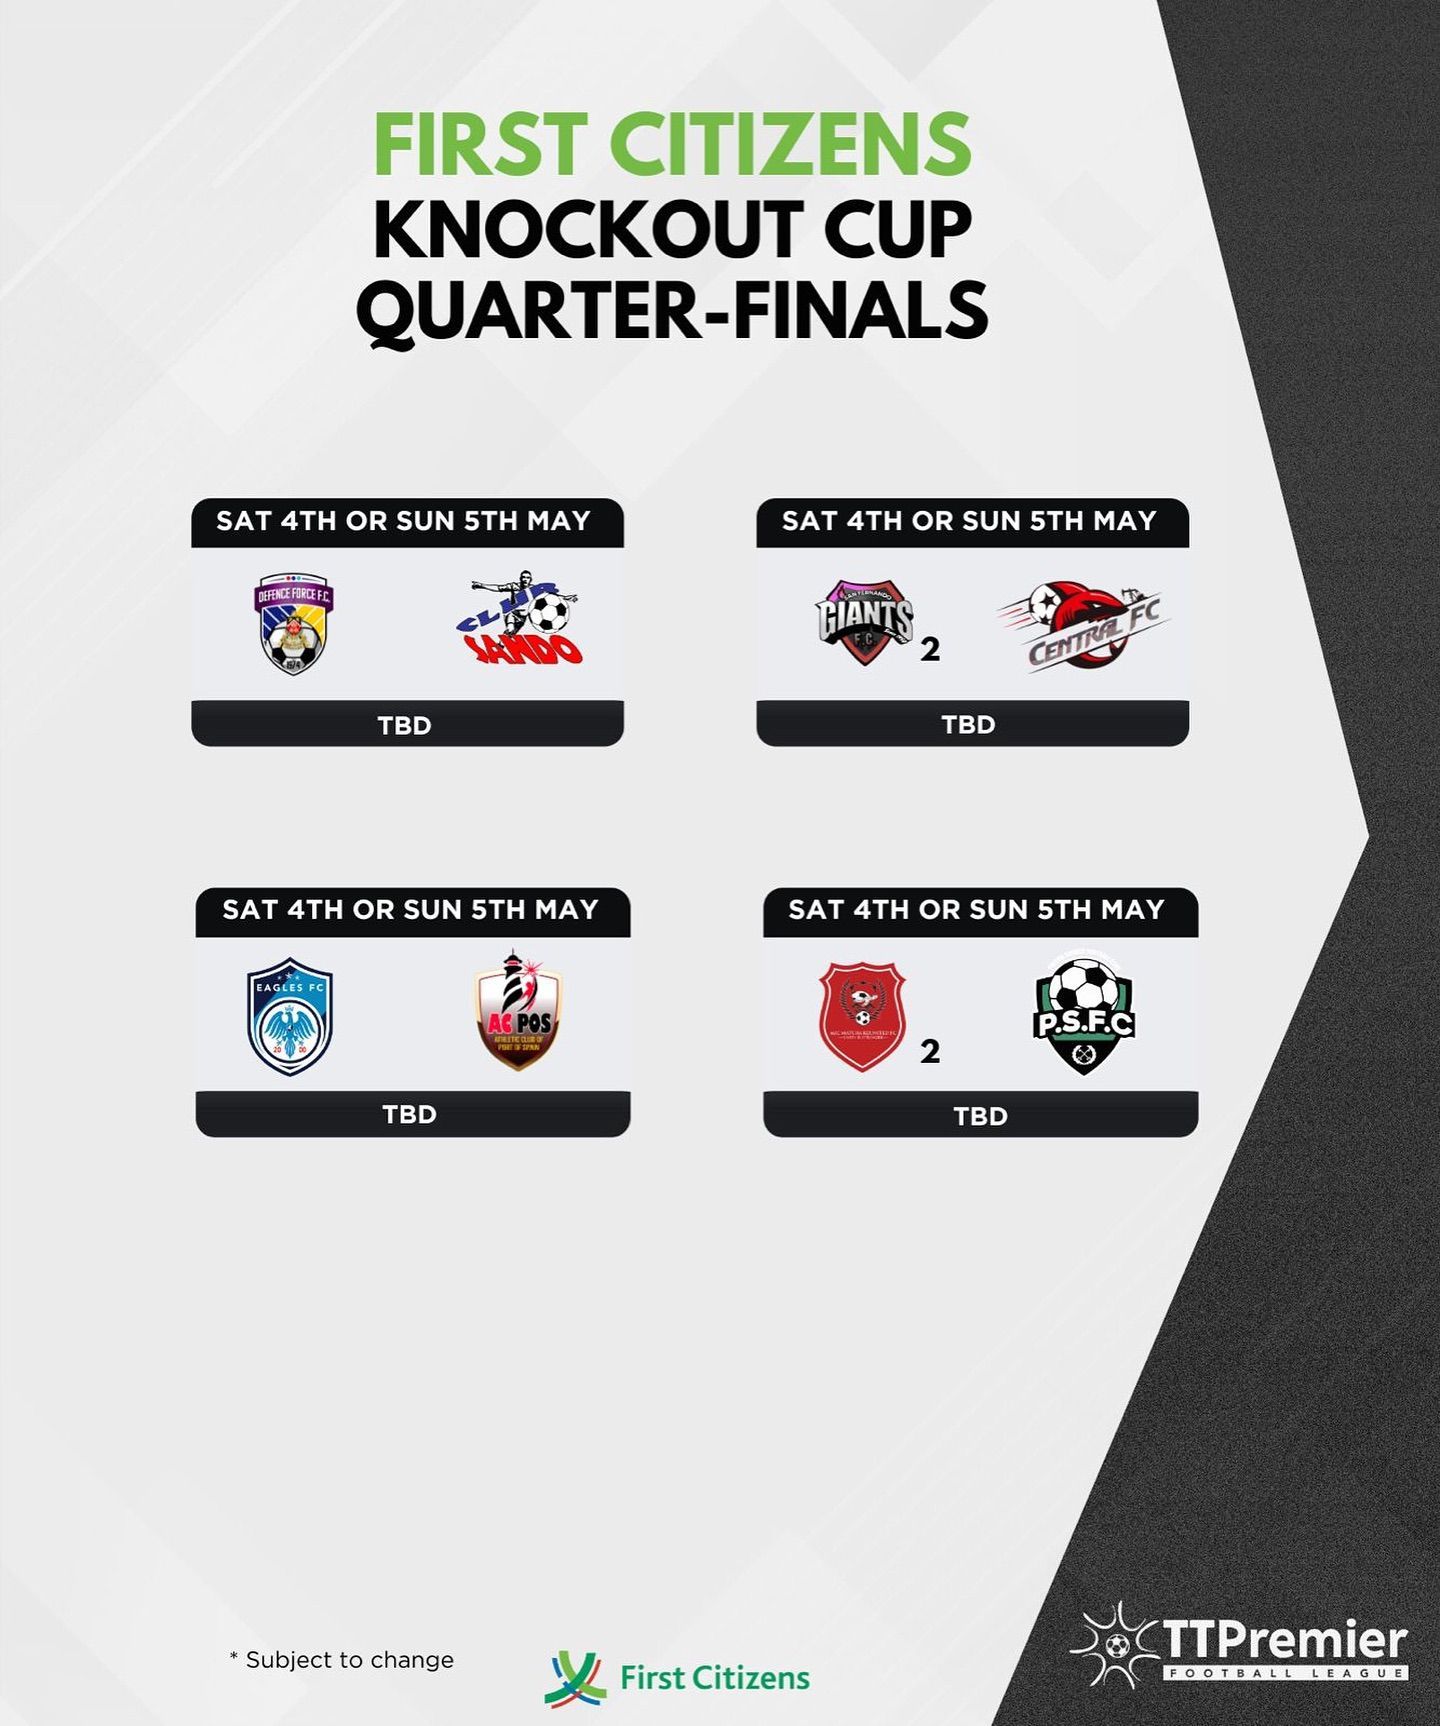 A poster for the first citizens knockout cup prelims